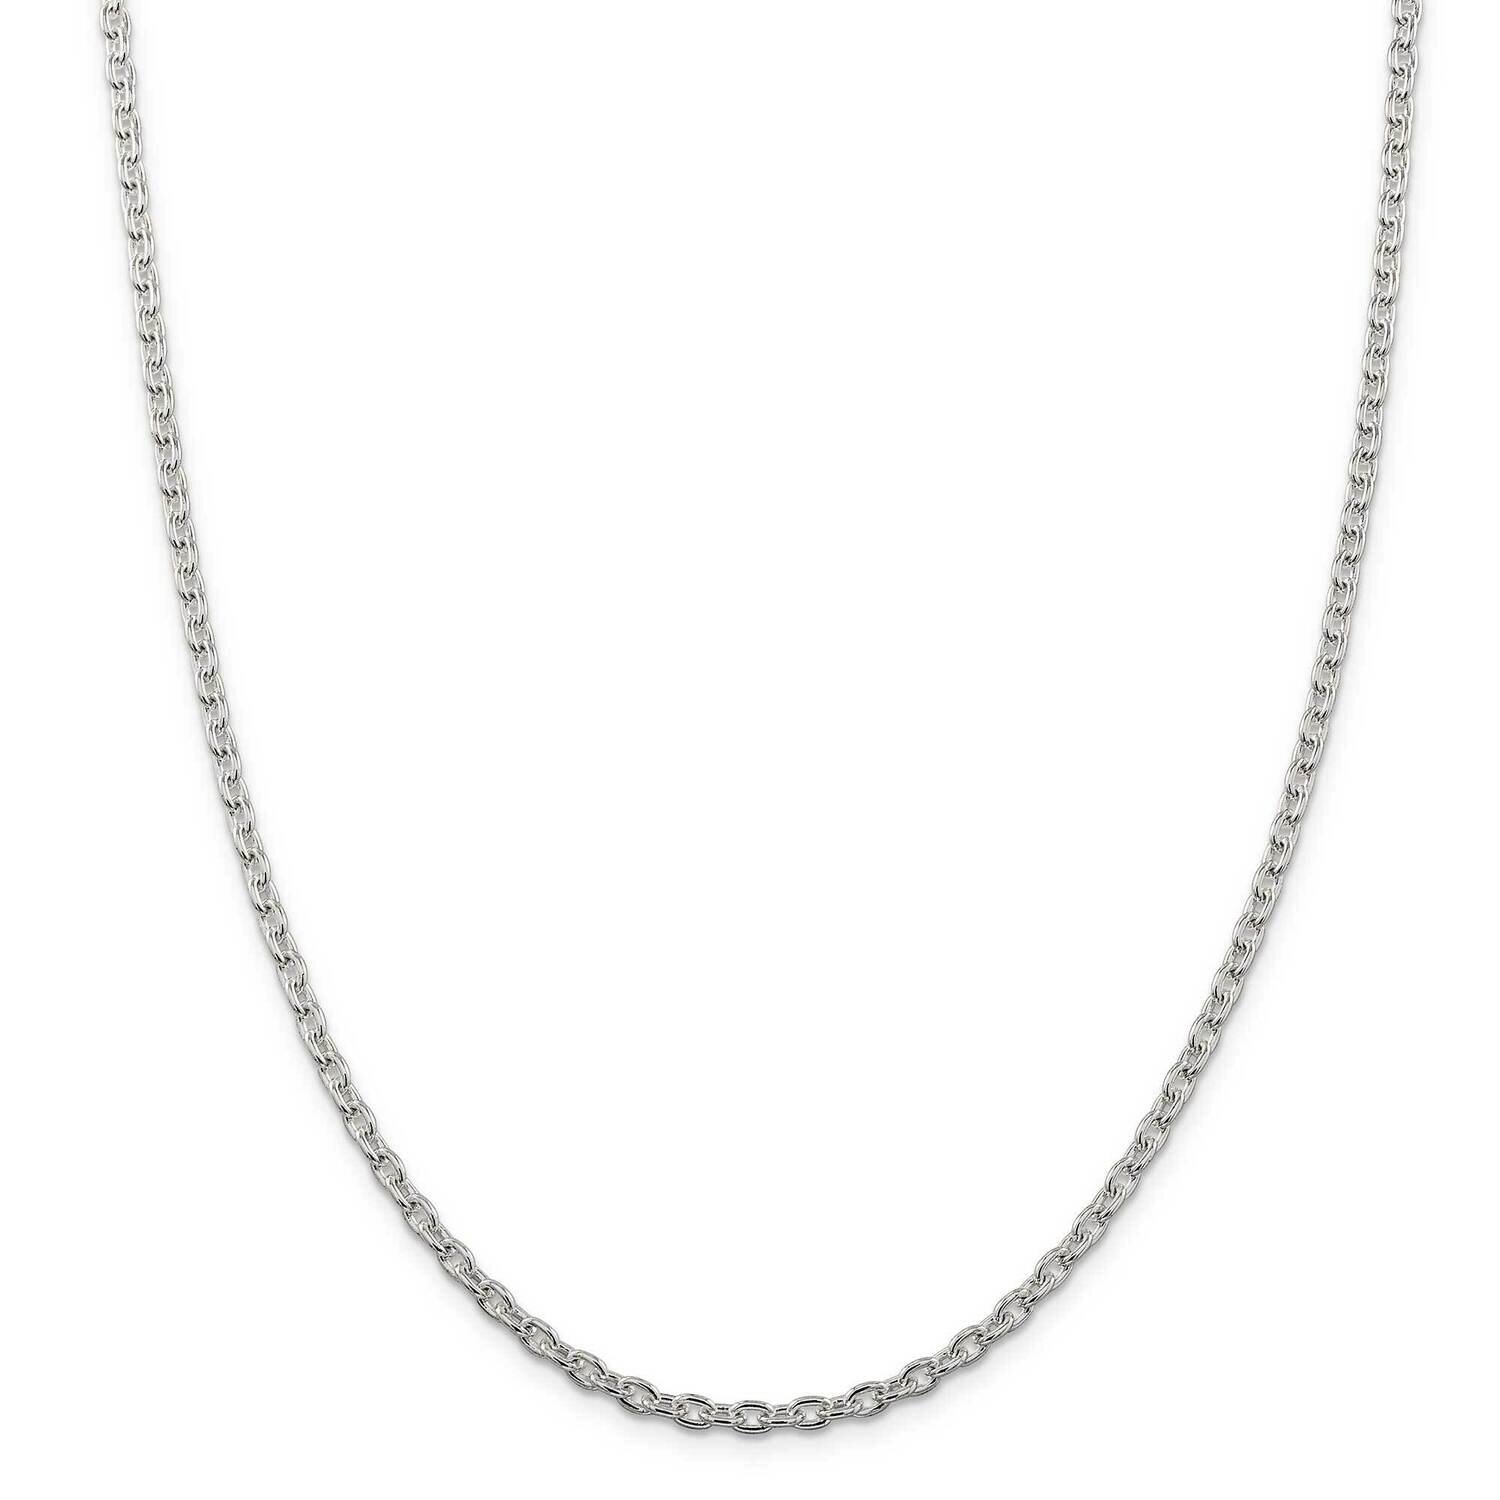 3.5mm Cable Chain 28 Inch Sterling Silver QCL100-28